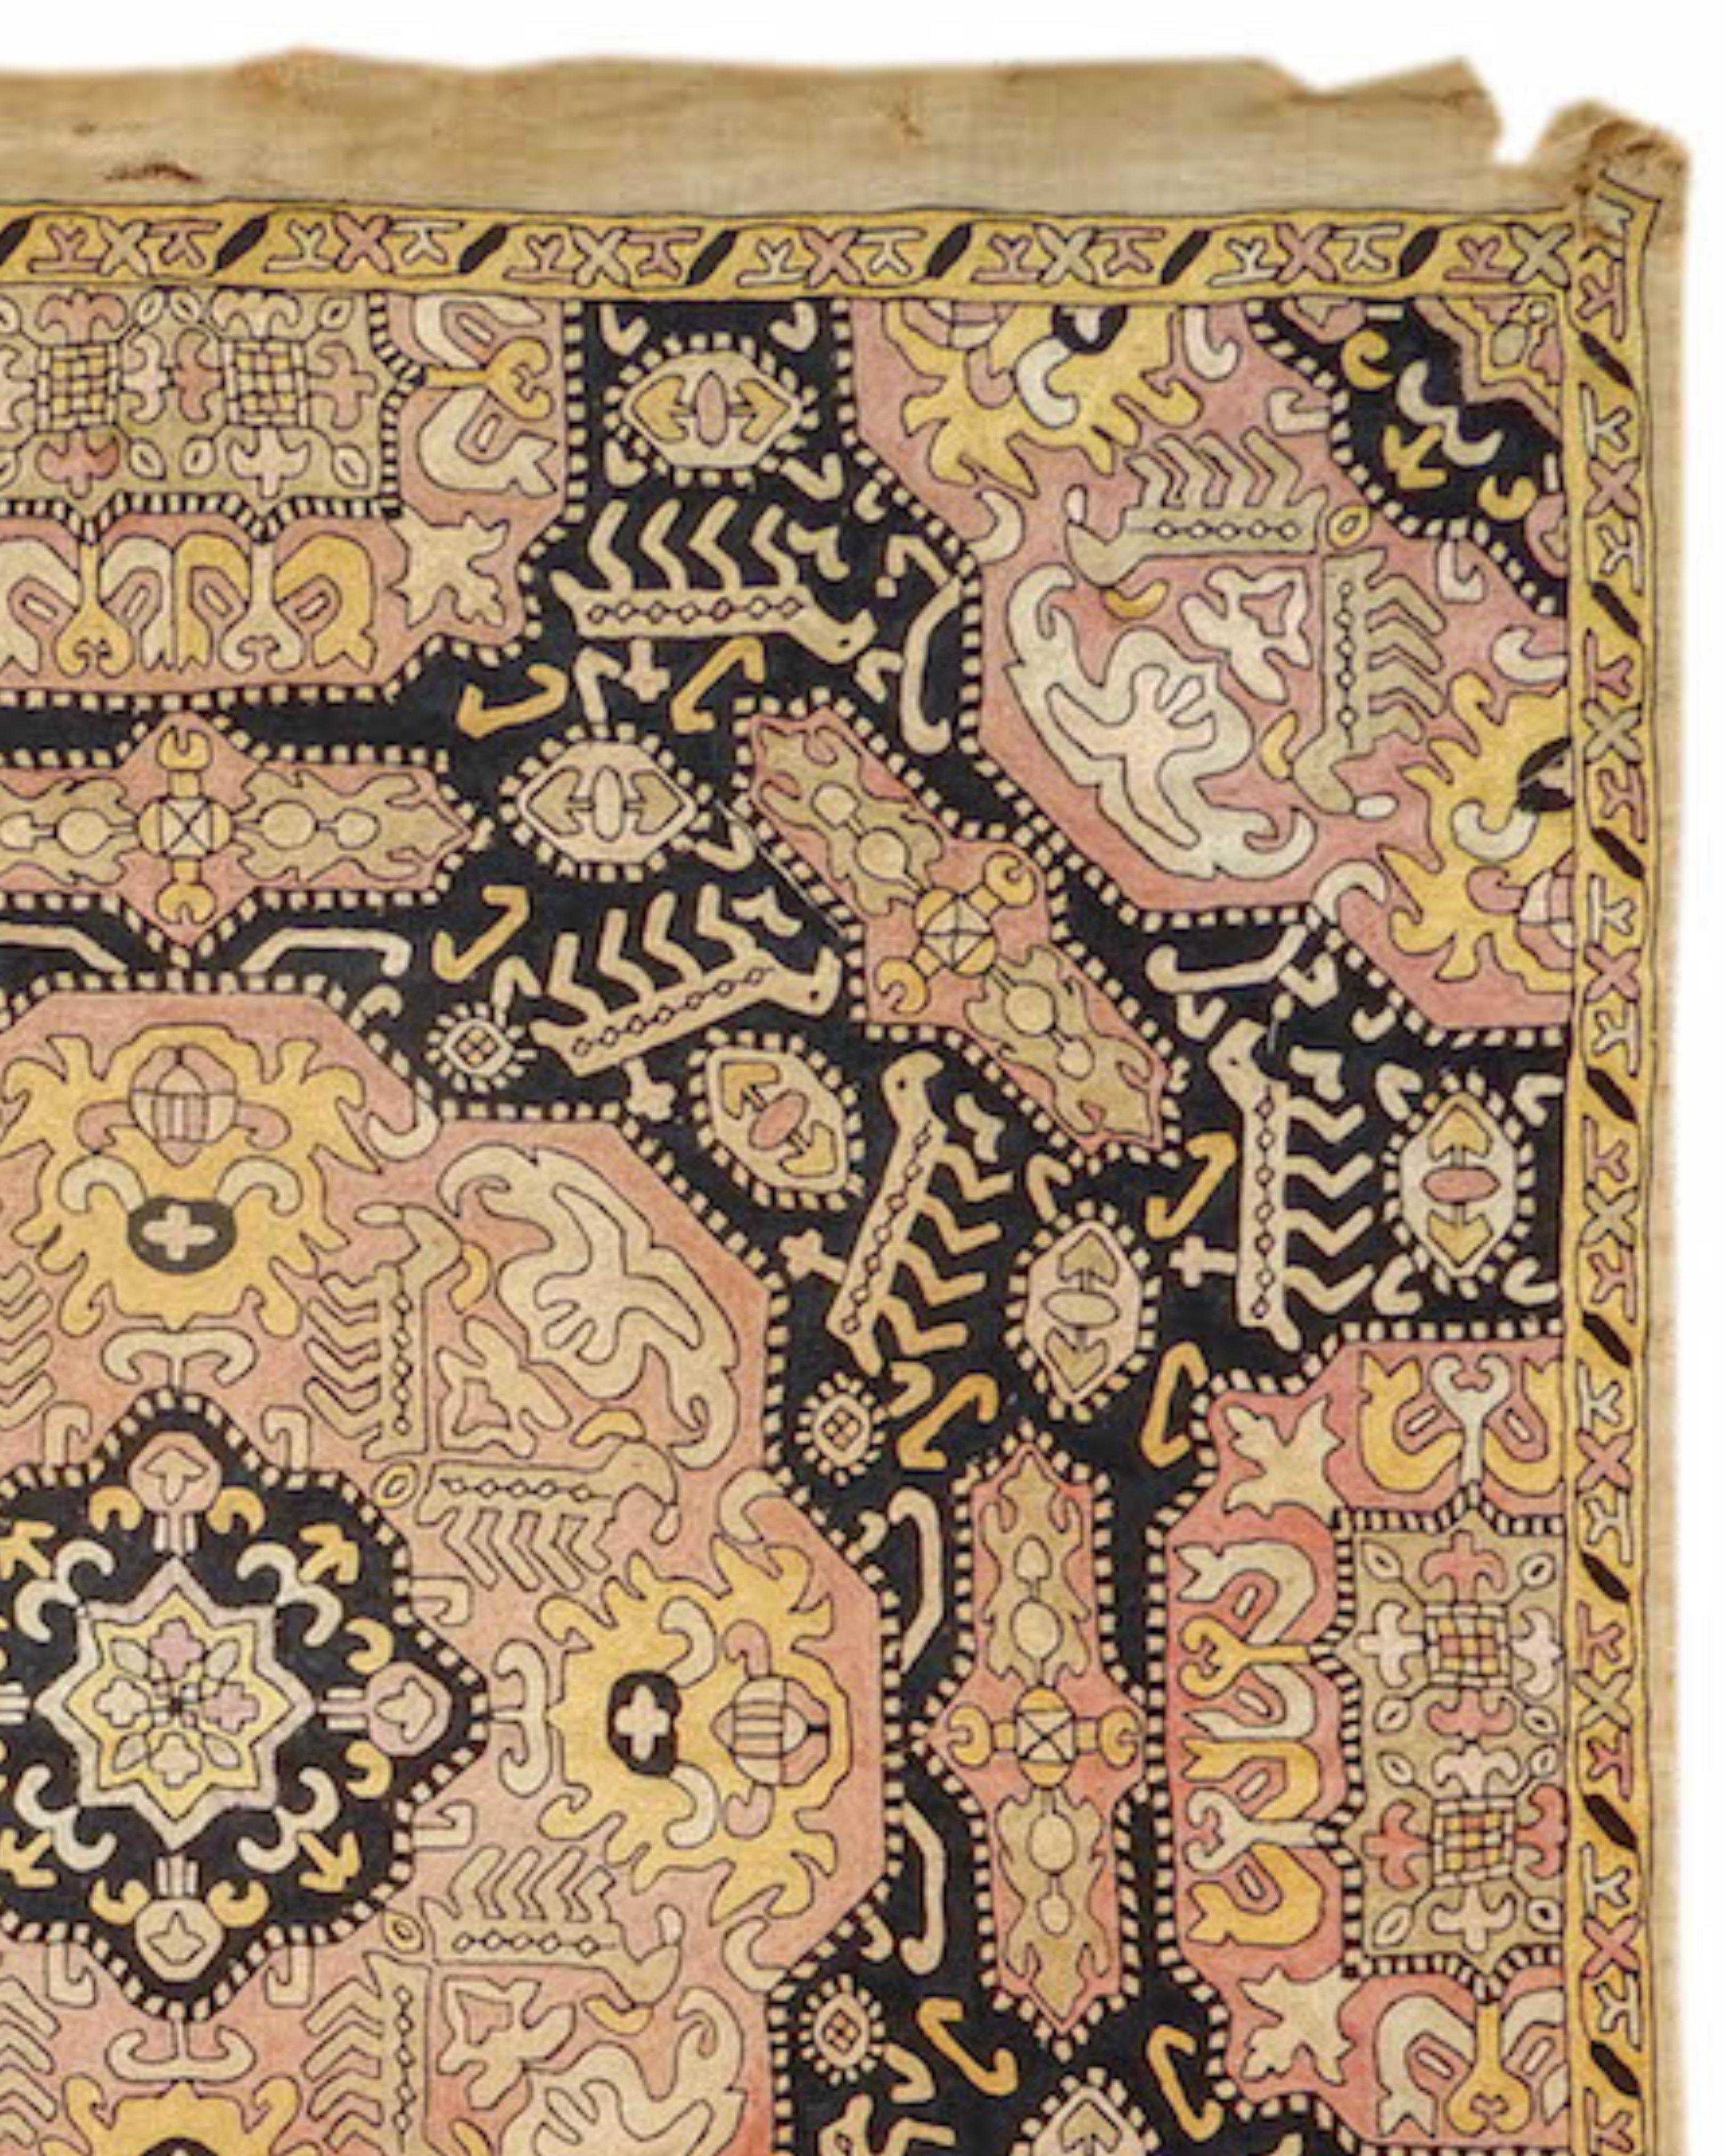 Caucasian Embroidery Rug, c. 1900

Additional information:
Dimensions: 2'10